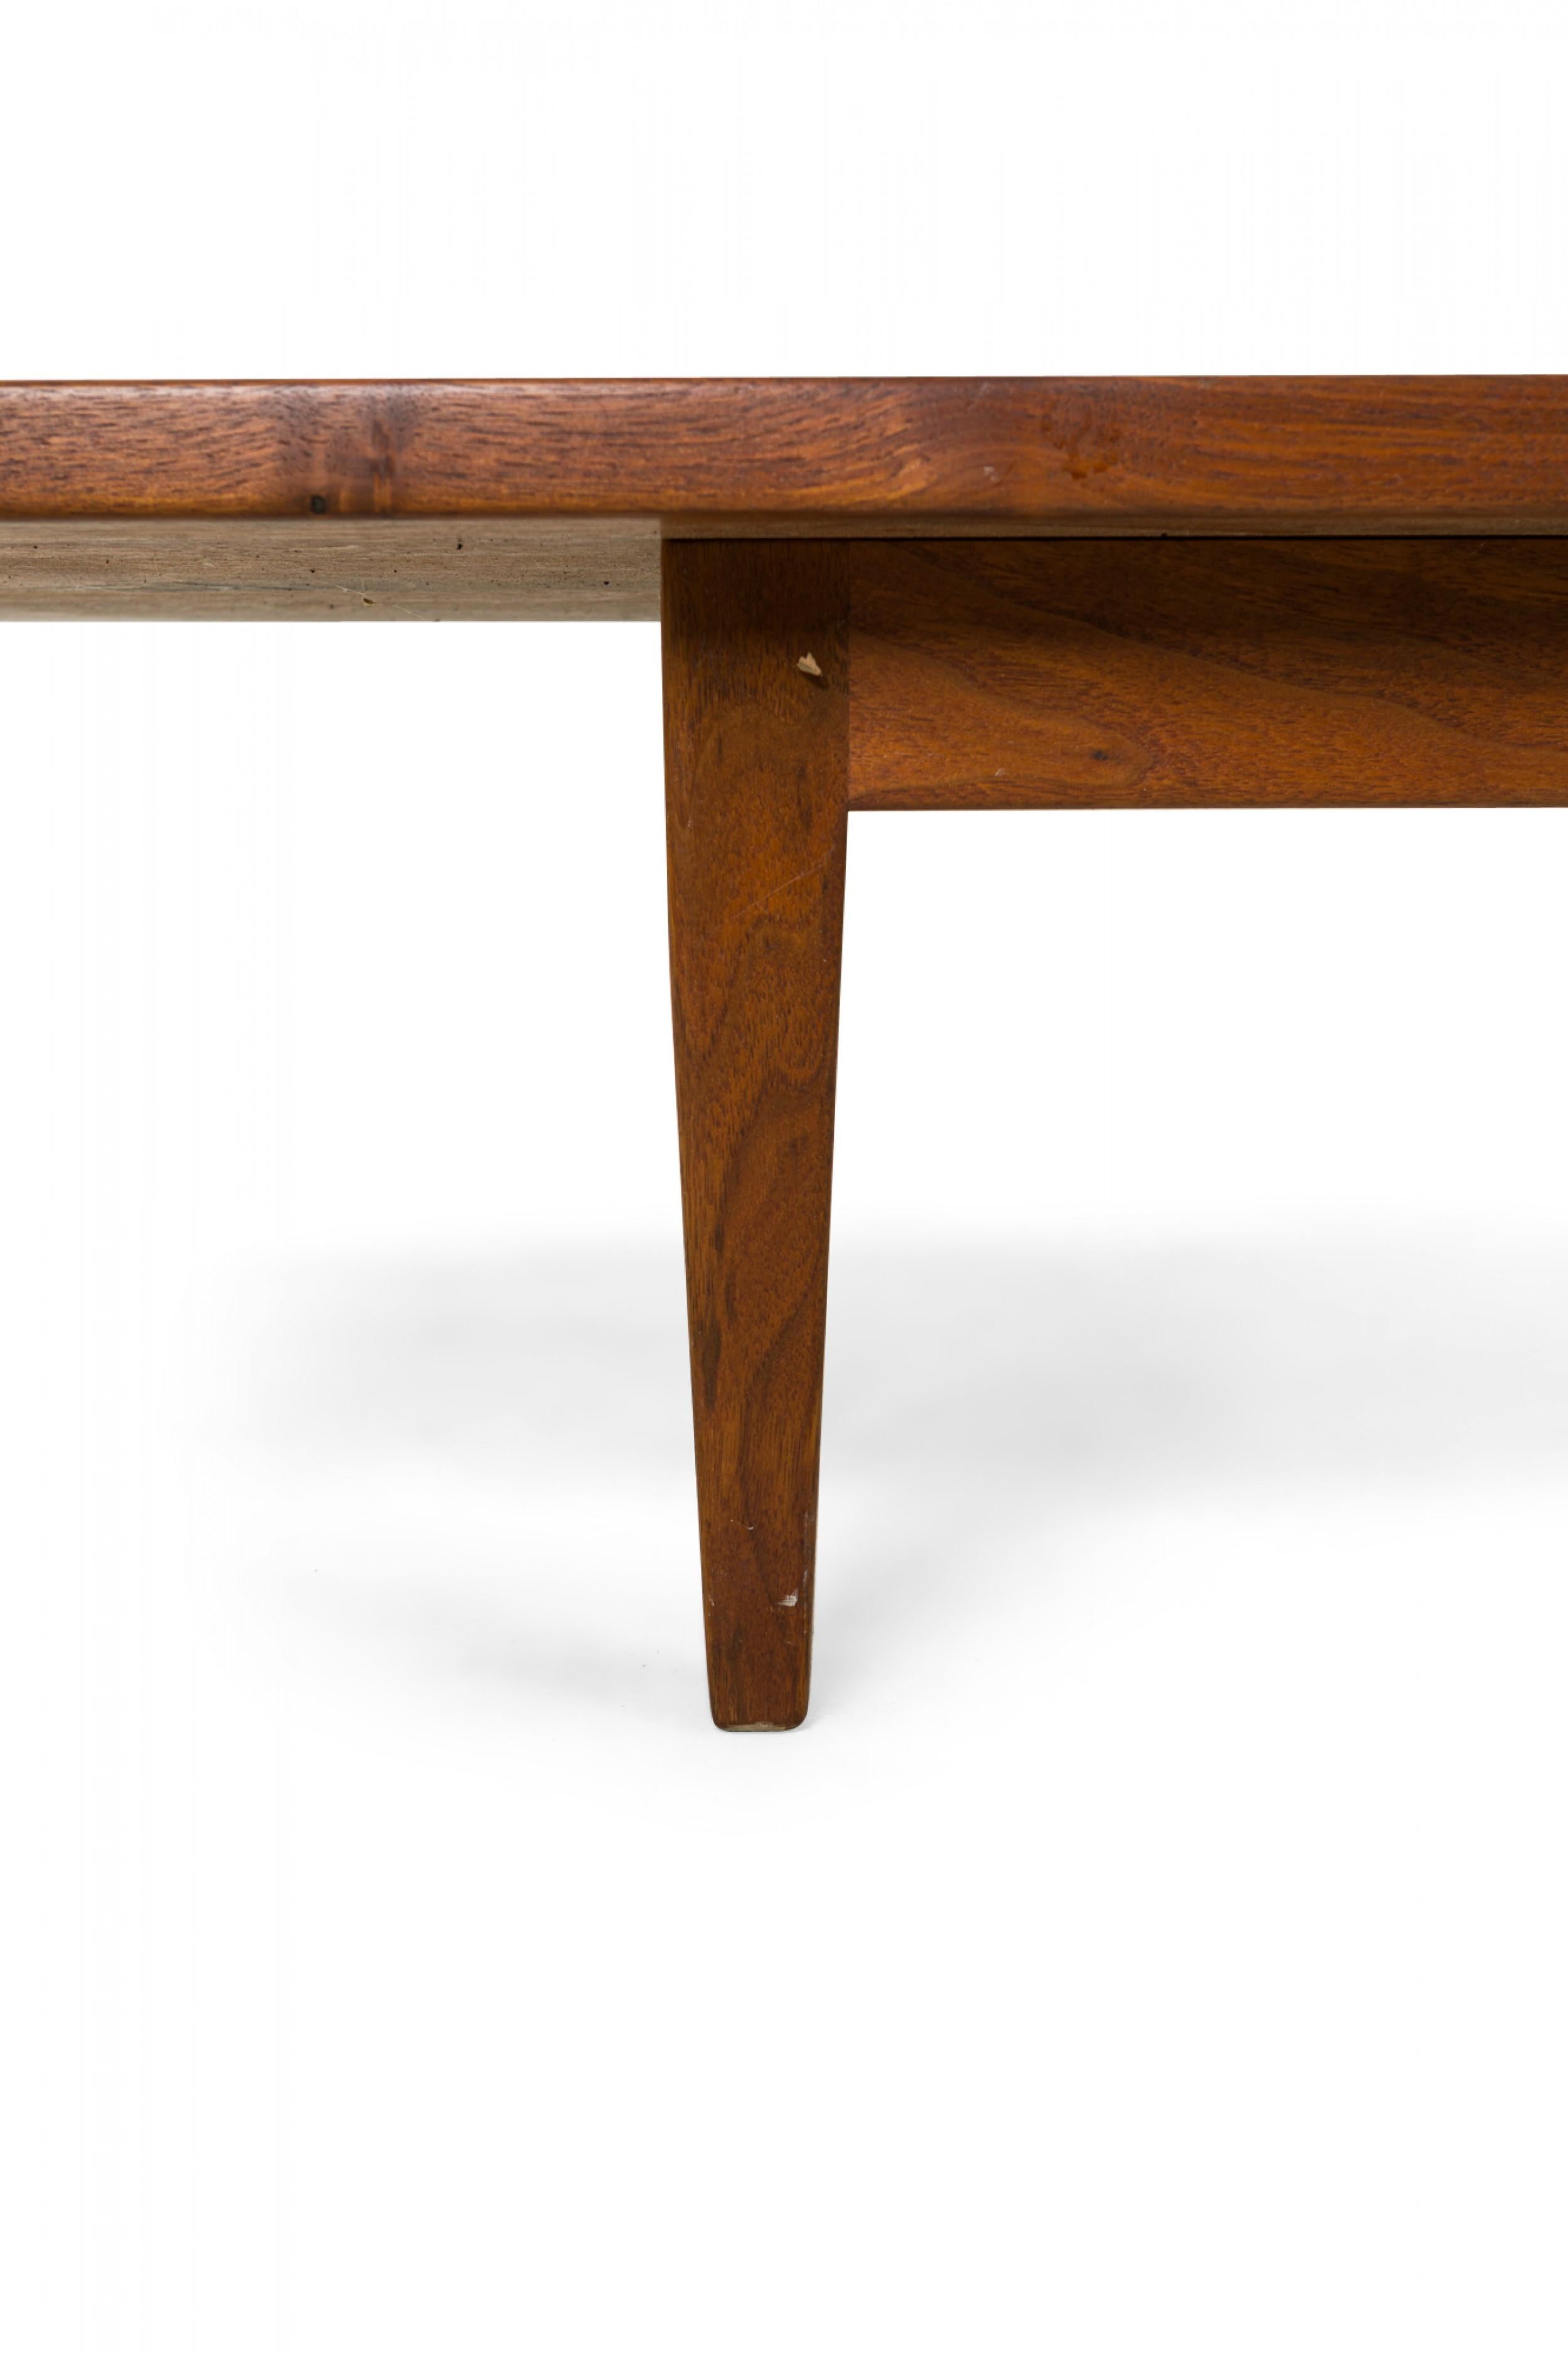 20th Century Arden Riddle American Mid-Century Wooden Low Table For Sale